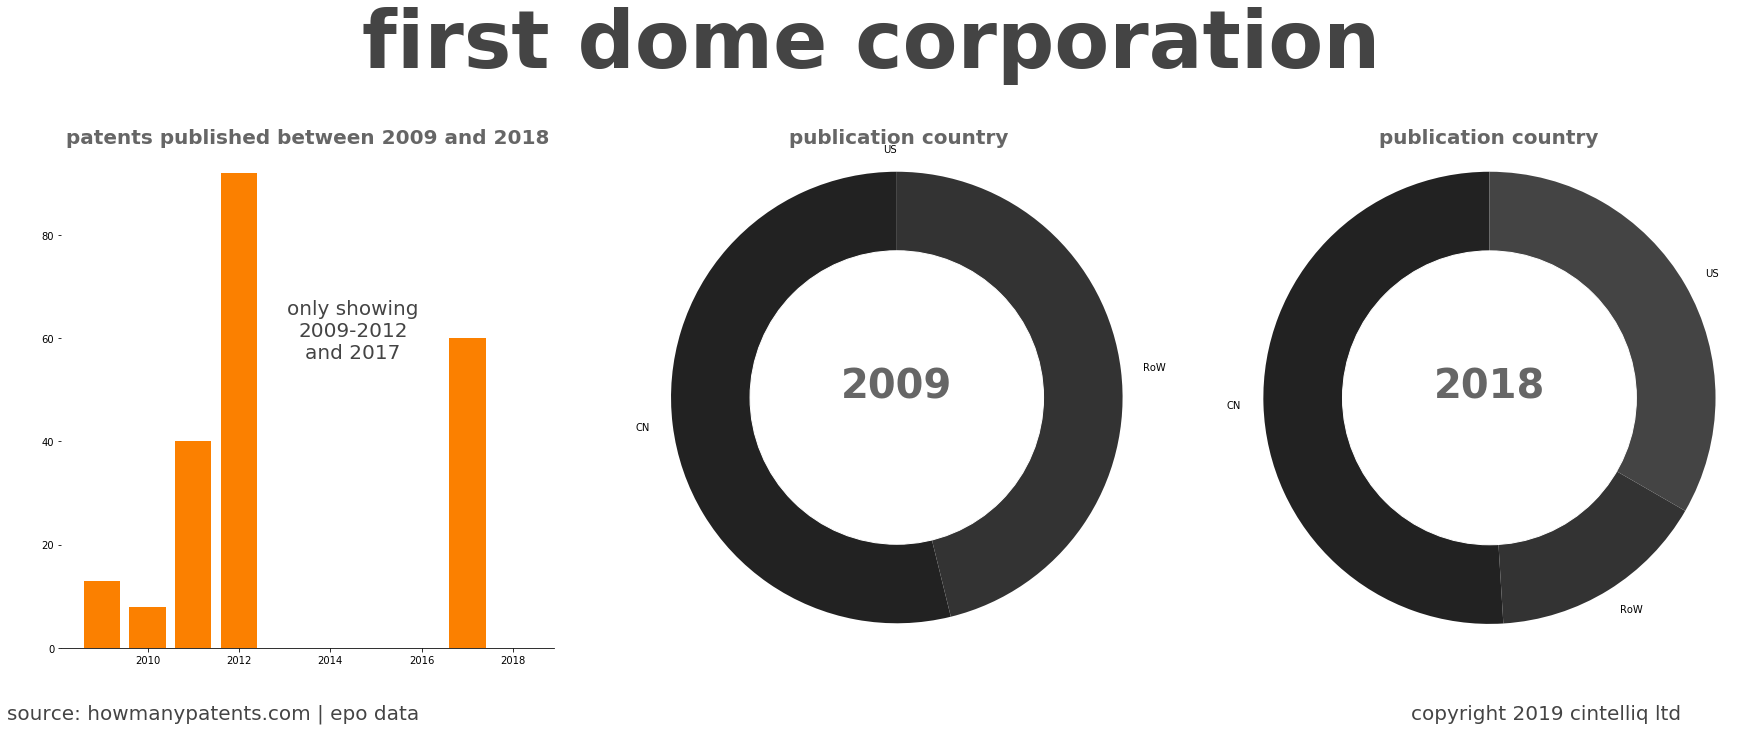 summary of patents for First Dome Corporation